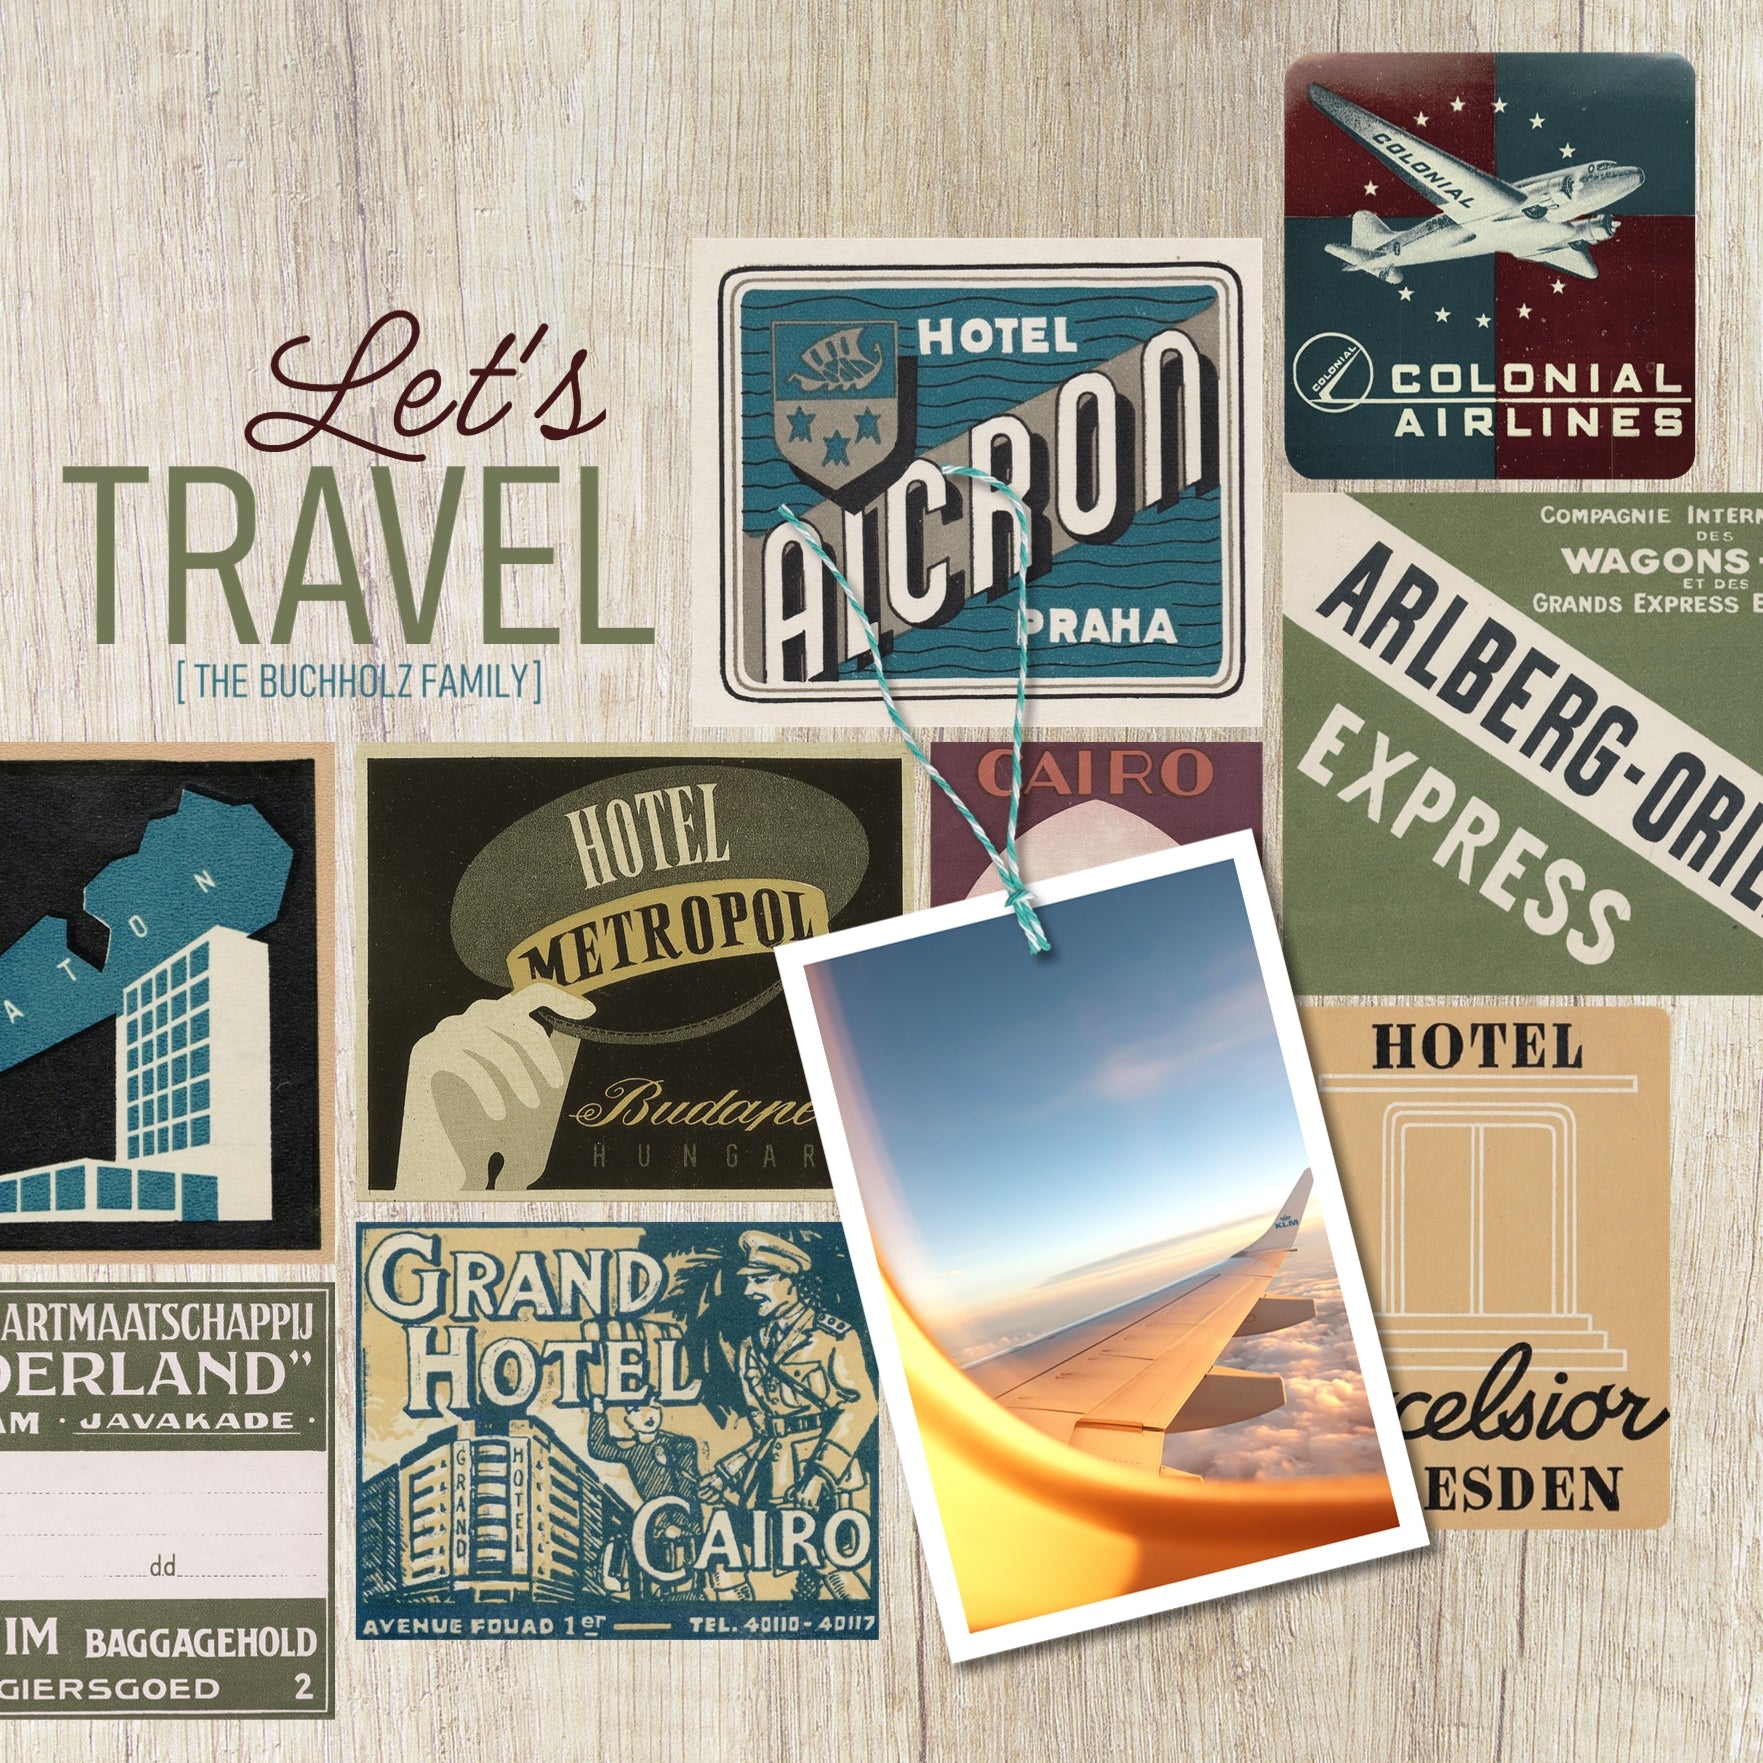 This digital art collection of vintage hotel luggage labels from around the world is the perfect addition to any travel pages. Labels include vacation destinations such as France, Italy, Rome, Hungary, Egypt, Germany, Hong Kong, Japan, Texas, the Mediterranean, Hawaii, Chicago, Kenya, the Netherlands, Washington, Thailand, Norway, Poland, Oregon, Singapore, England, California, and more!